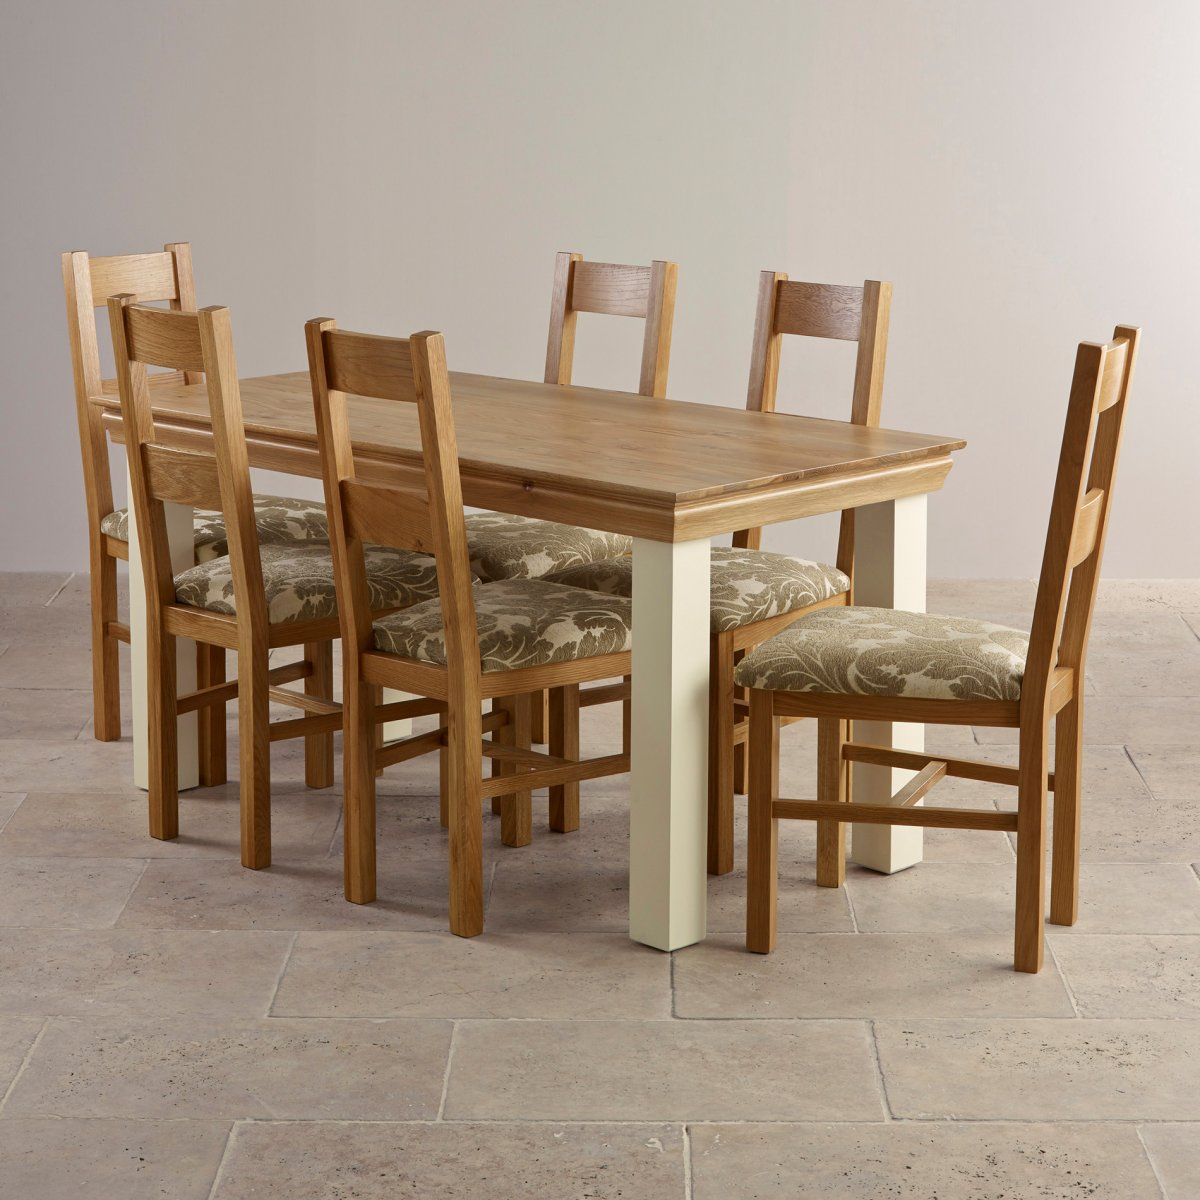 Country Cottage Dining Set In Painted Oak: Dining Table +6 tout Countrycottage Dining Room Furniture Reviews 